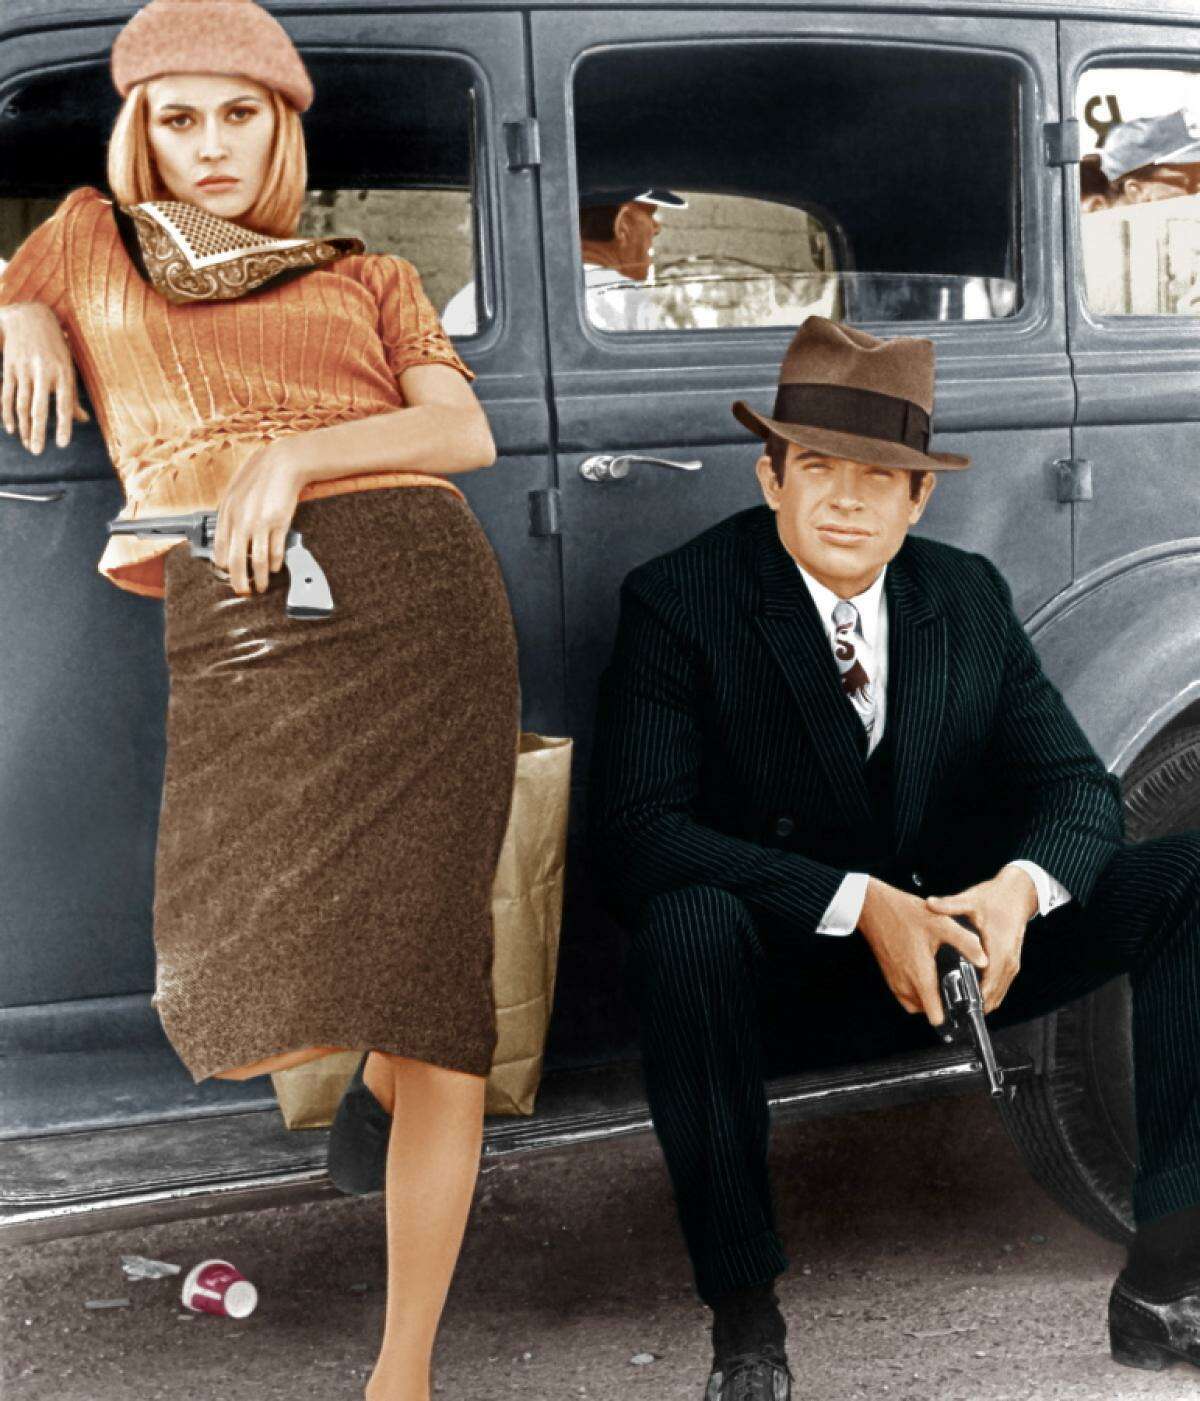 Diggers bonnie and clyde 1967